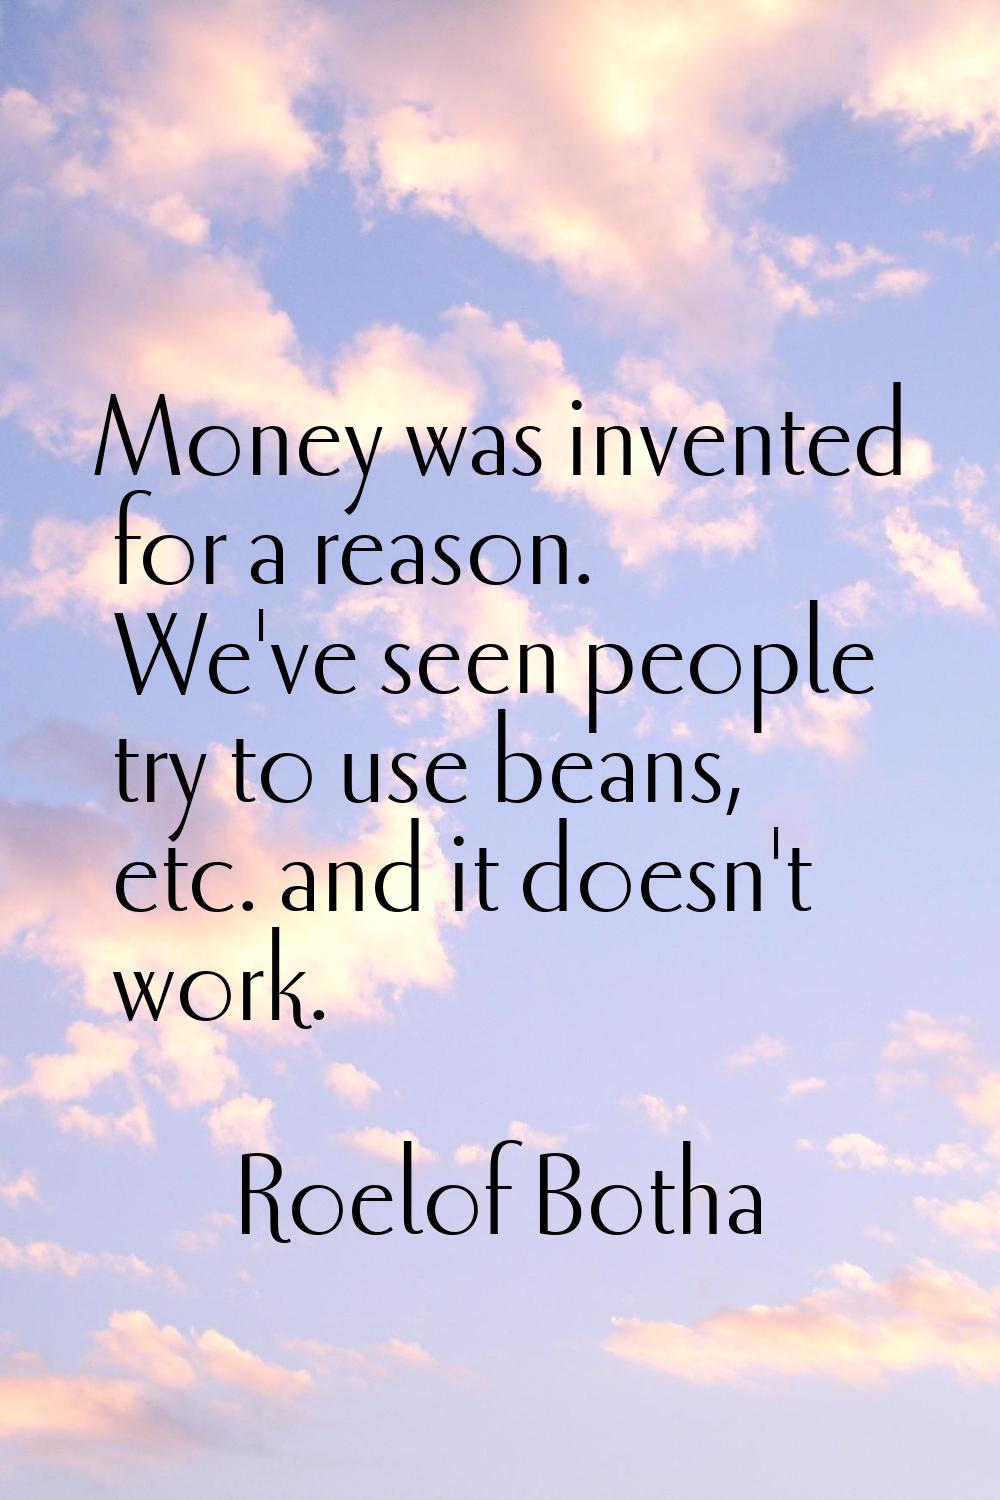 Money was invented for a reason. We've seen people try to use beans, etc. and it doesn't work.